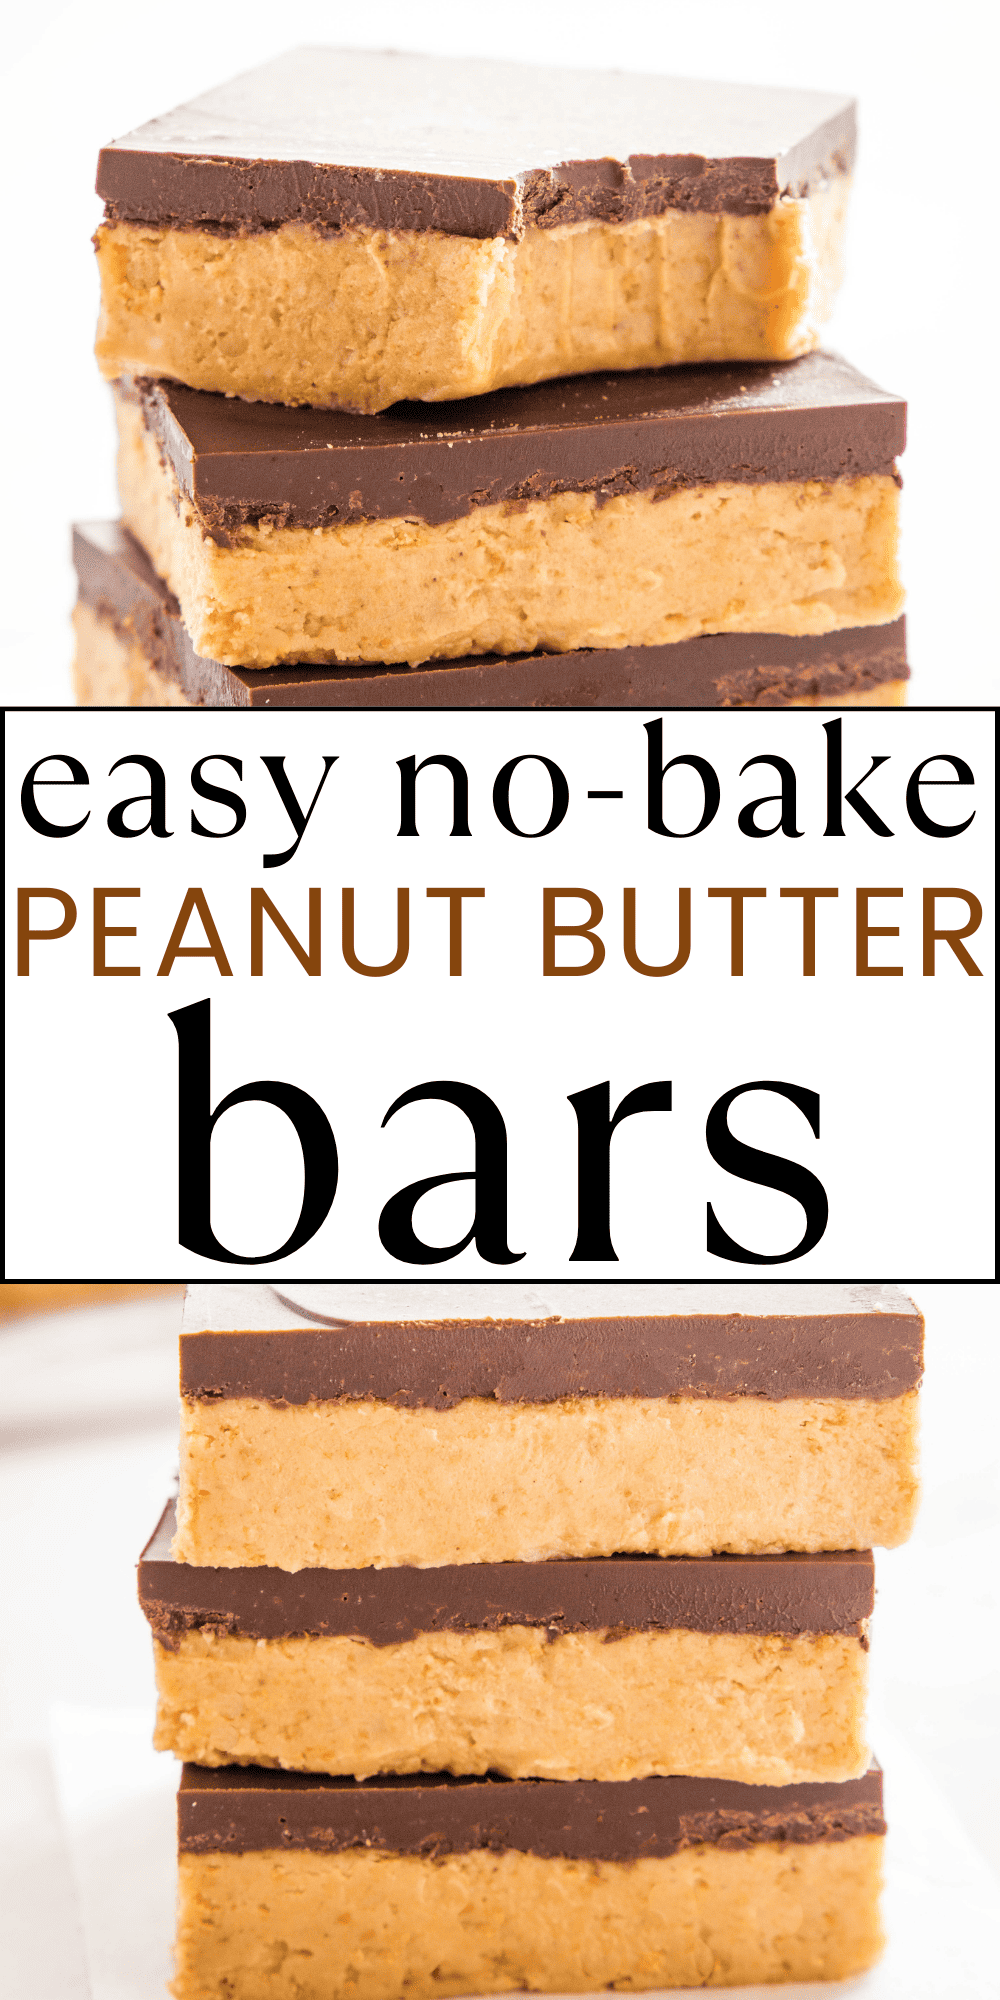 This Peanut Butter Bars recipe is the BEST no bake dessert made with a creamy peanut butter filling and topped with a layer of chocolate. A quick and easy dessert recipe with the flavour of Reese's peanut butter cups. Recipe from thebusybaker.ca! #peanutbutterbars #nobakepeanutbutterbars #nobakedessert #easydessert #easydessertrecipe #nobakebars #reesespeanutbutterbars #peanutbuttercup #copycatrecipe #peanutbutterbarsrecipe via @busybakerblog